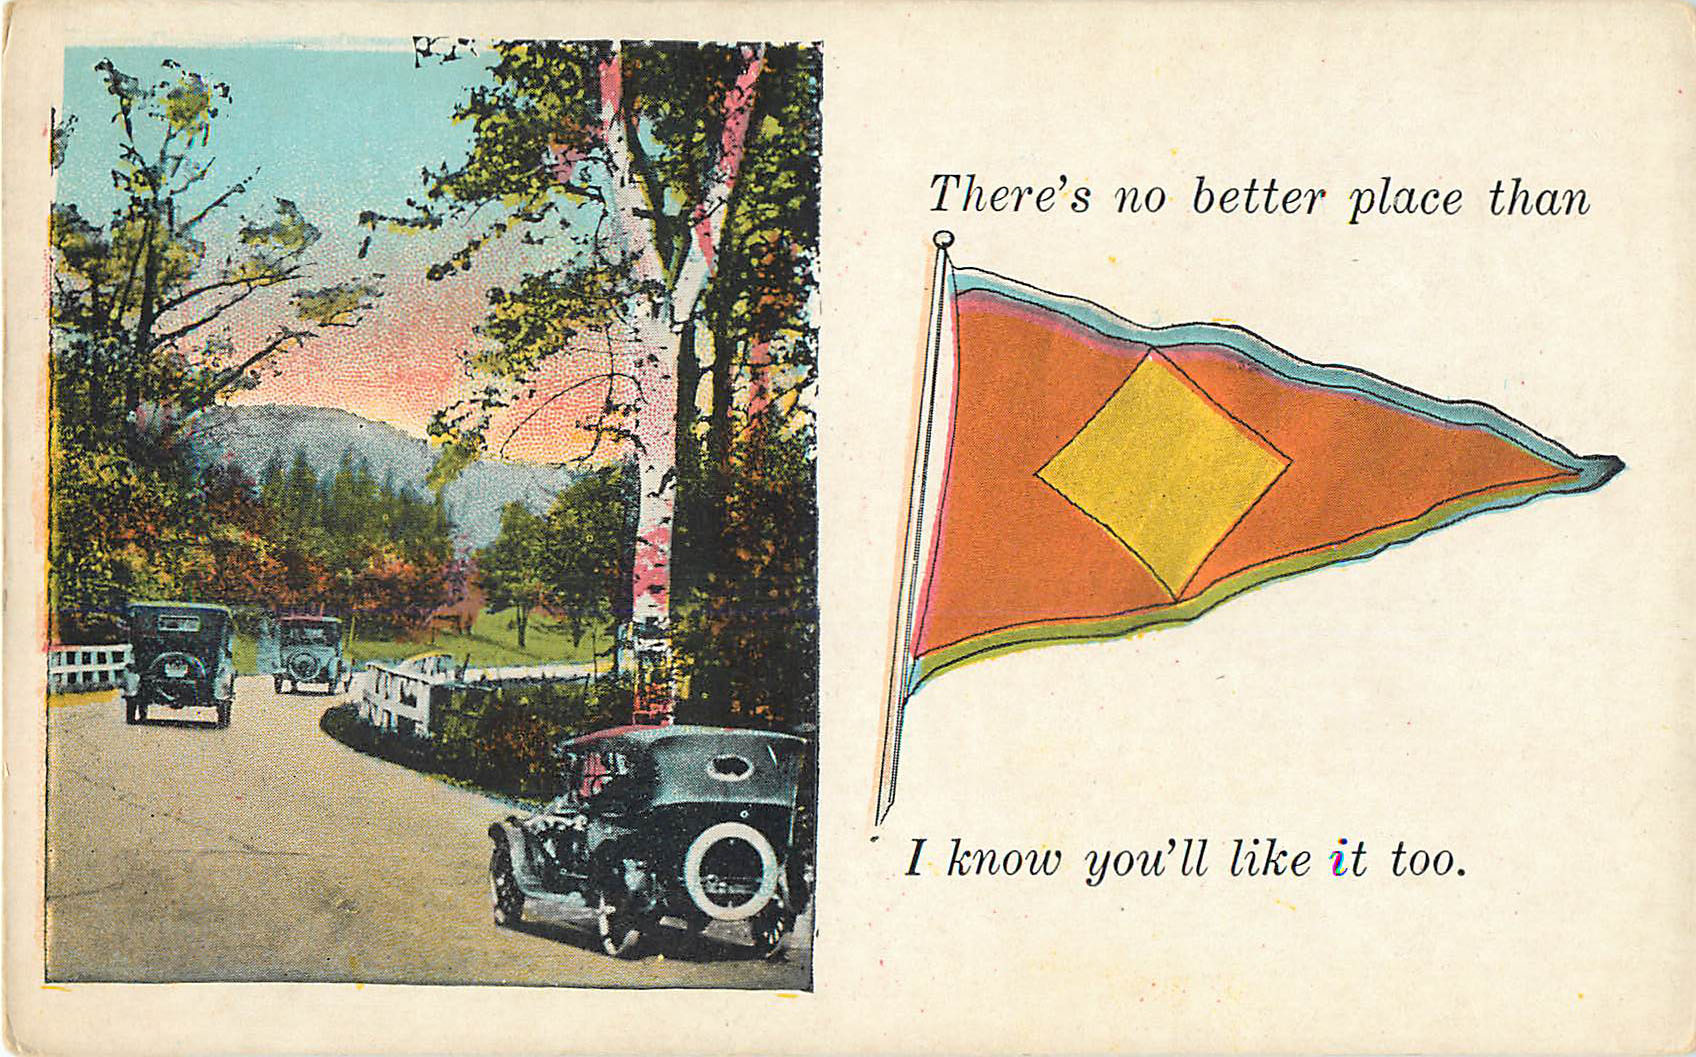 There's no betterplace than - Pennant Postcard